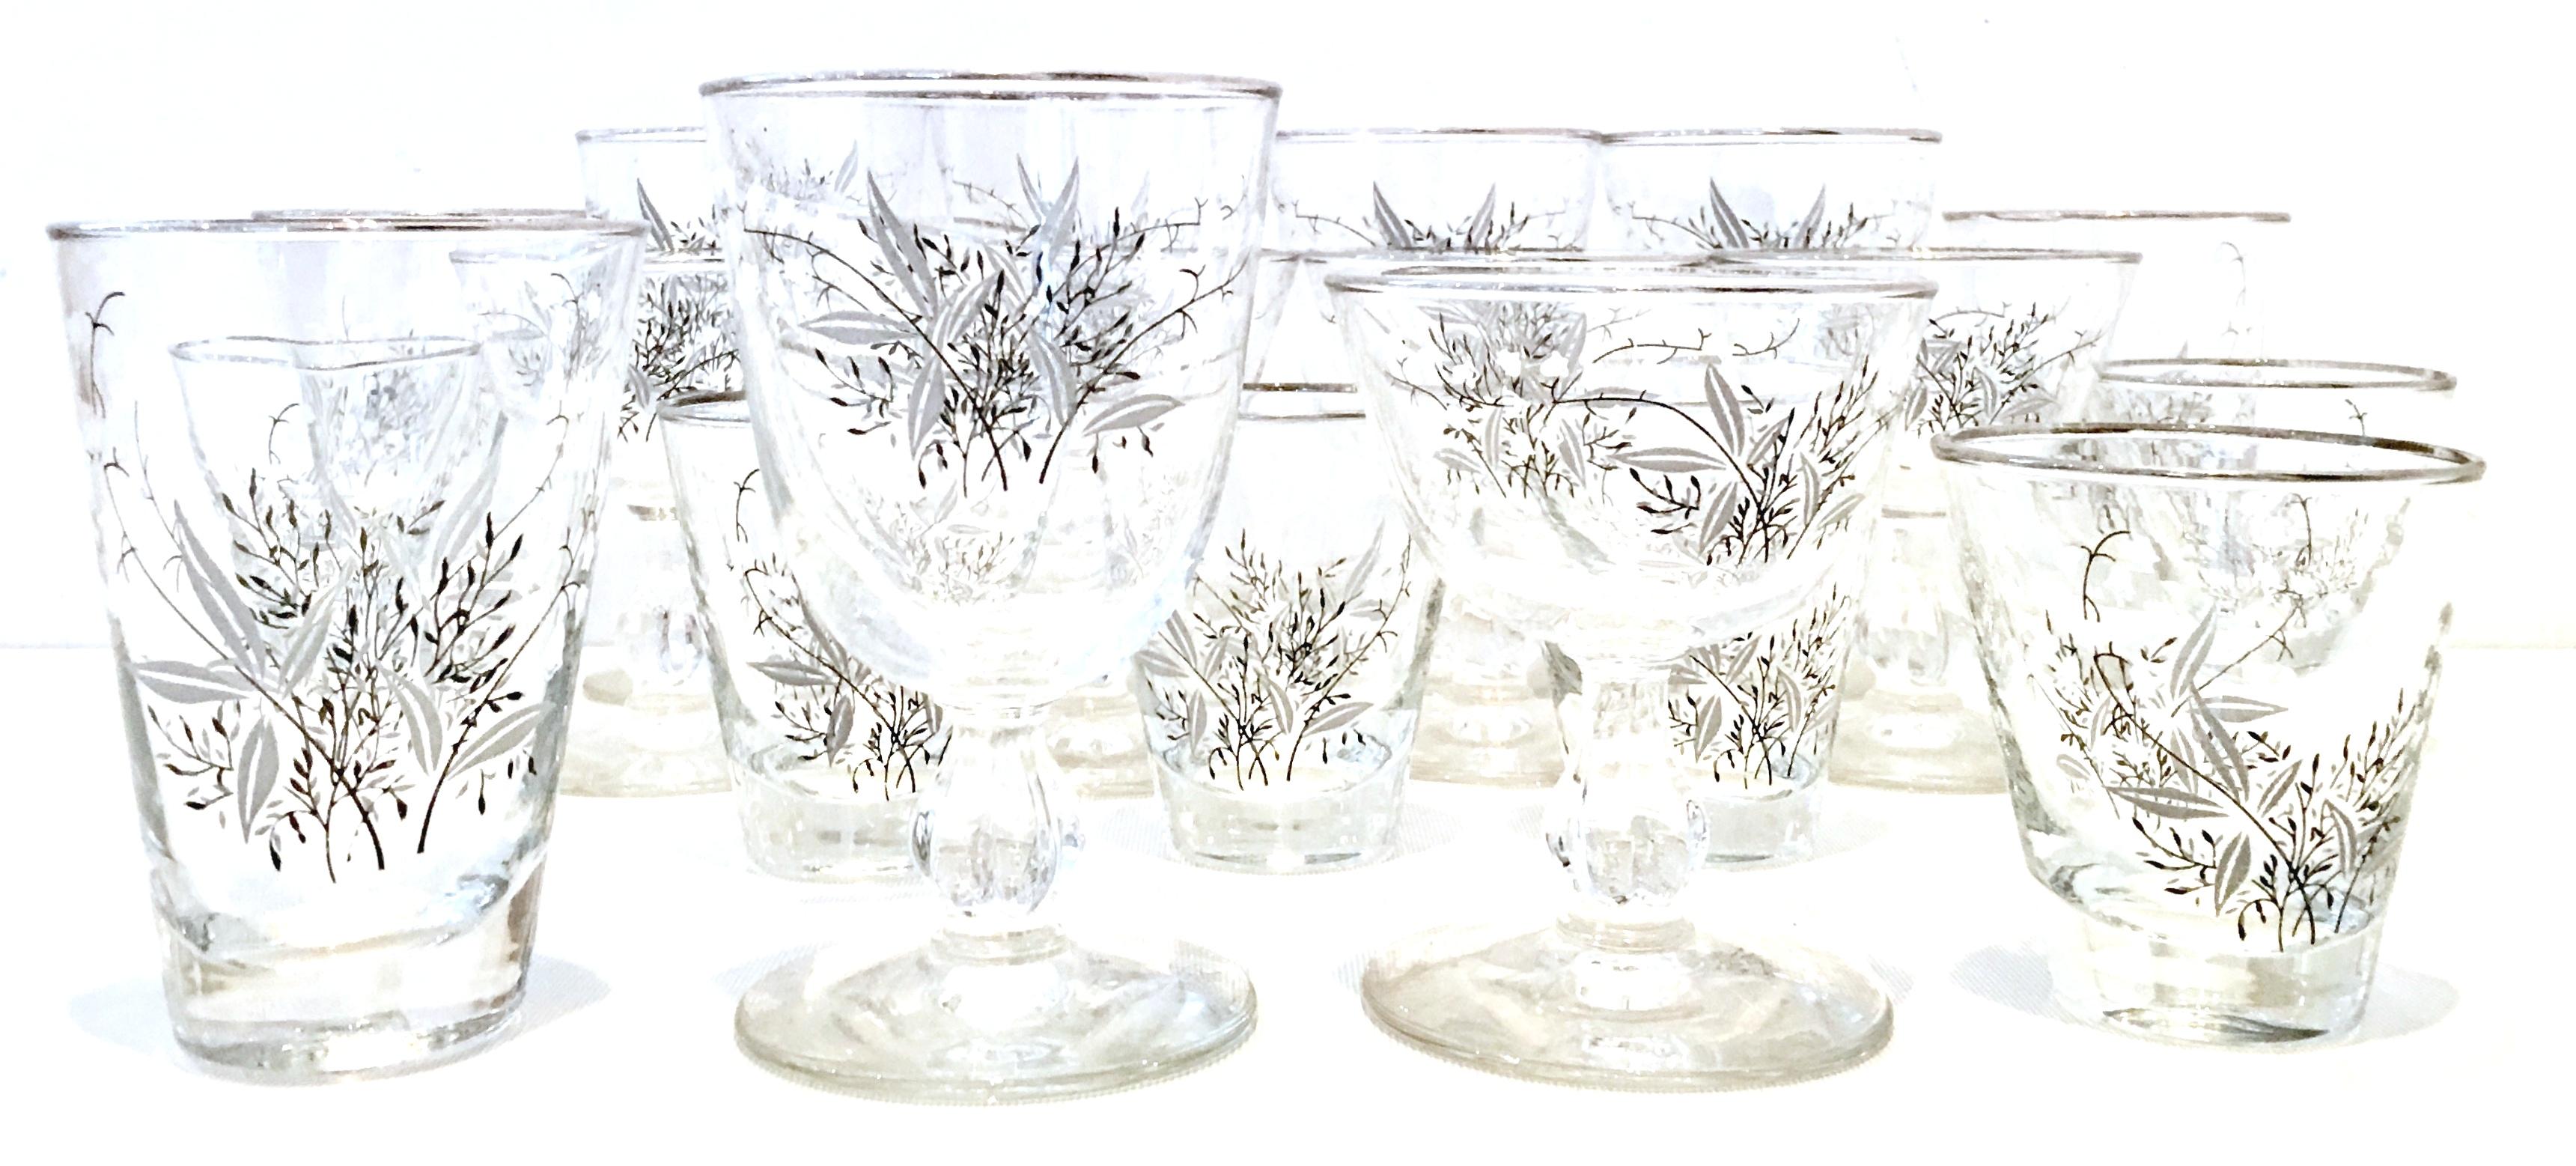 Mid-Century Modern sterling silver and embossed floral motif glass drinks set of 19 pieces. The embossed and printed pattern features a sterling silver rim with black, white and grey floral motif. Set includes, six cocktail glasses, five coupe stem